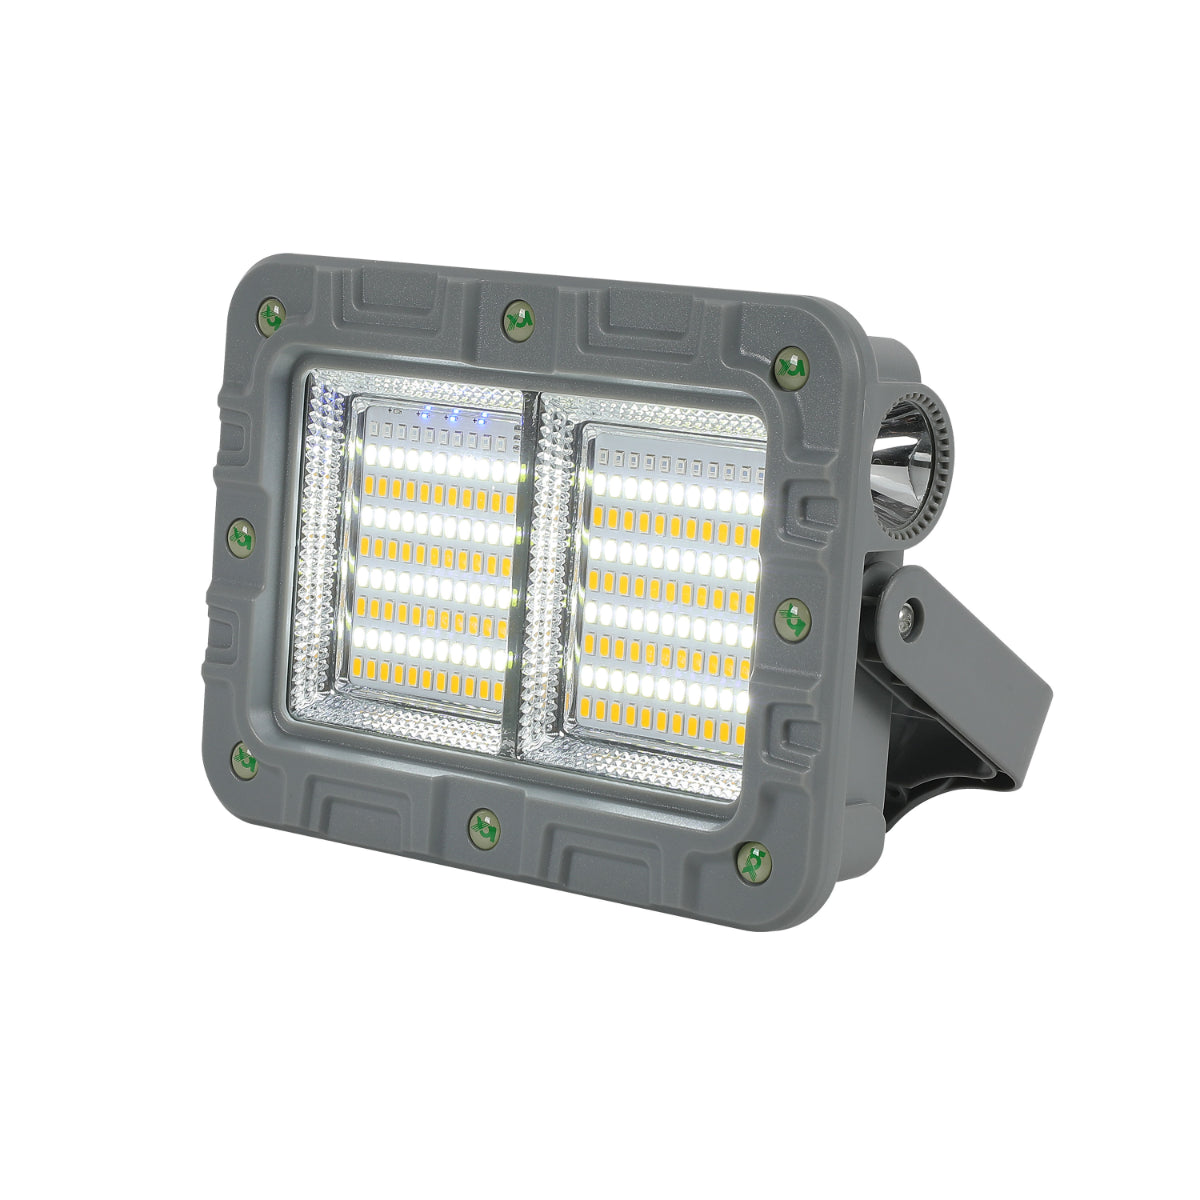 Main image of Solar Rechargeable Emergency Fllodlight 5 in 1 224-03350